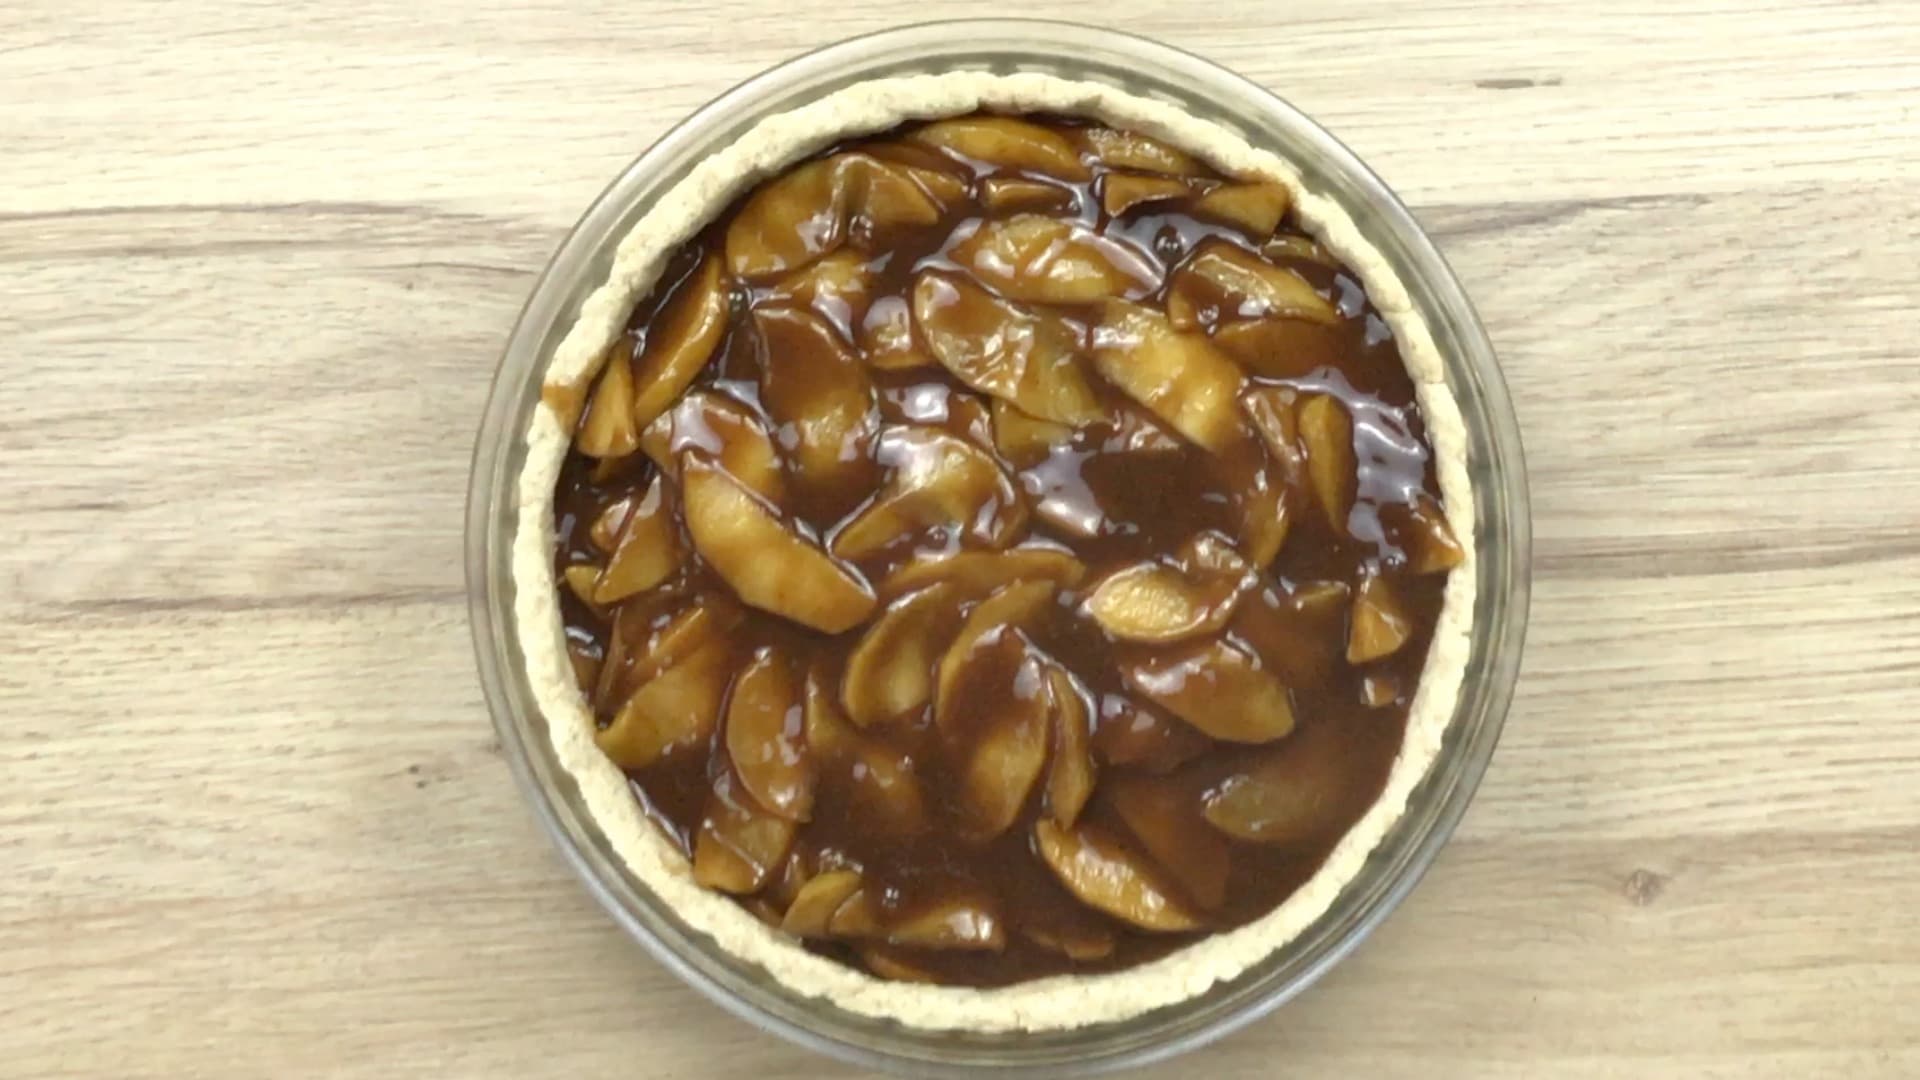 A pie crust in a glass pie pan filled with apple slices in caramel sauce.